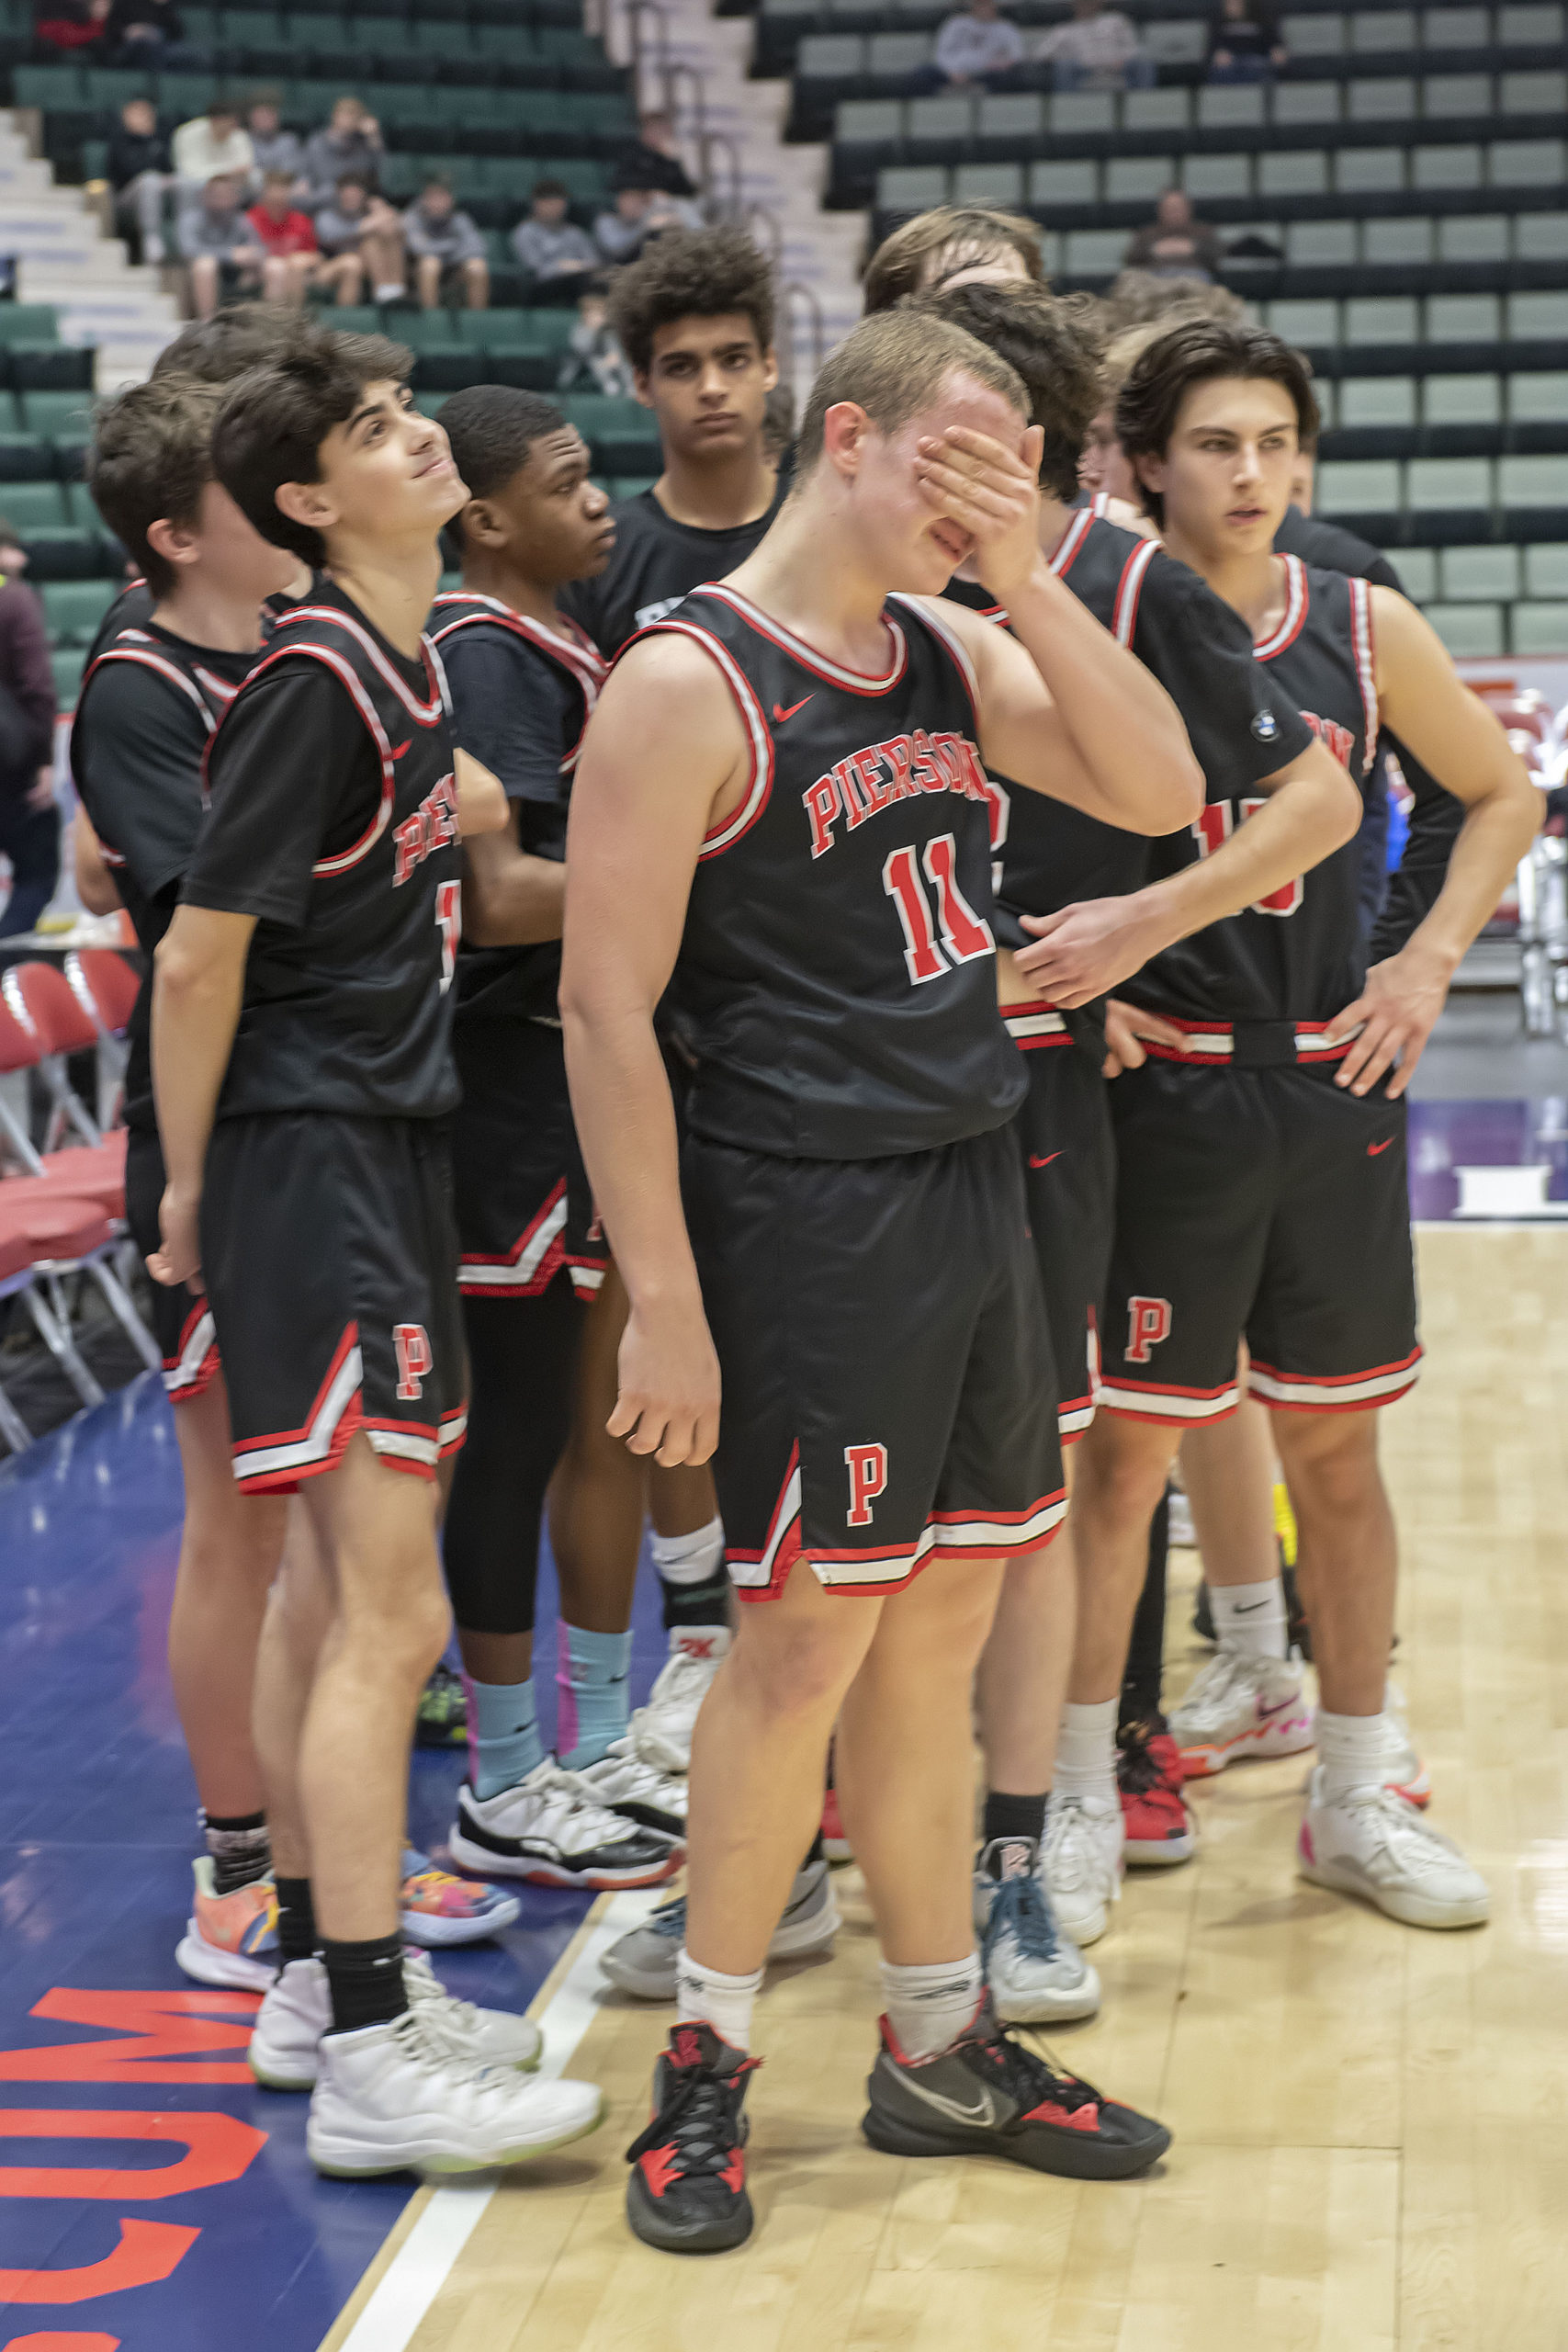 Logan Hartstein and the rest of the Whalers react after the final whistle blows in their 66-62 loss to Newfield on Friday.    MICHAEL HELLER